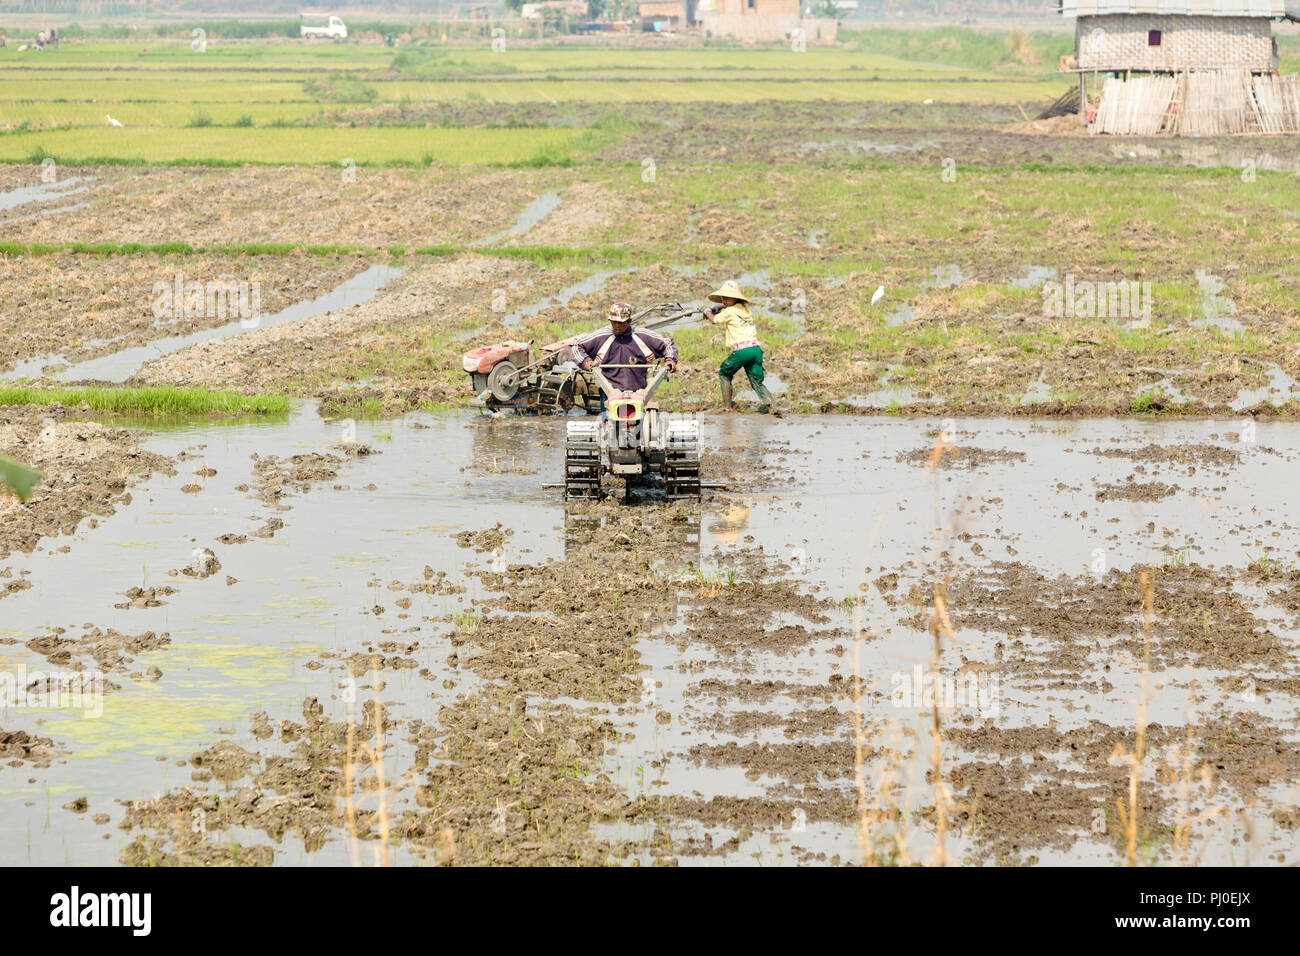 A tractor preparing a flooded paddy field for plantation of rice seedlings, Nyaungshwe, Myanmar Stock Photo